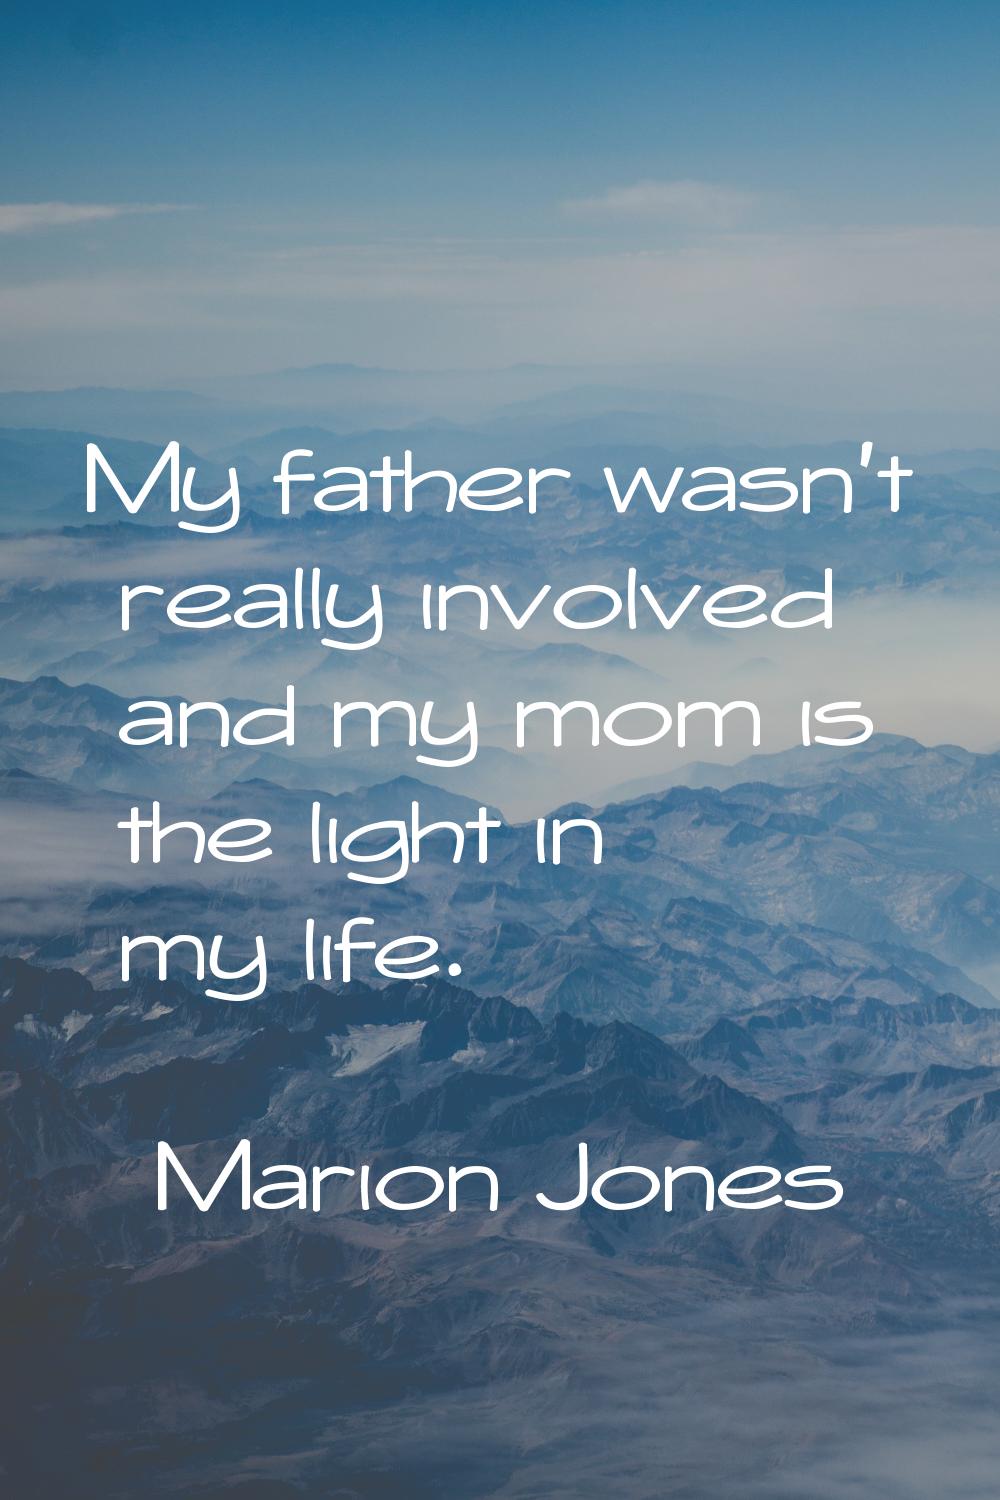 My father wasn't really involved and my mom is the light in my life.